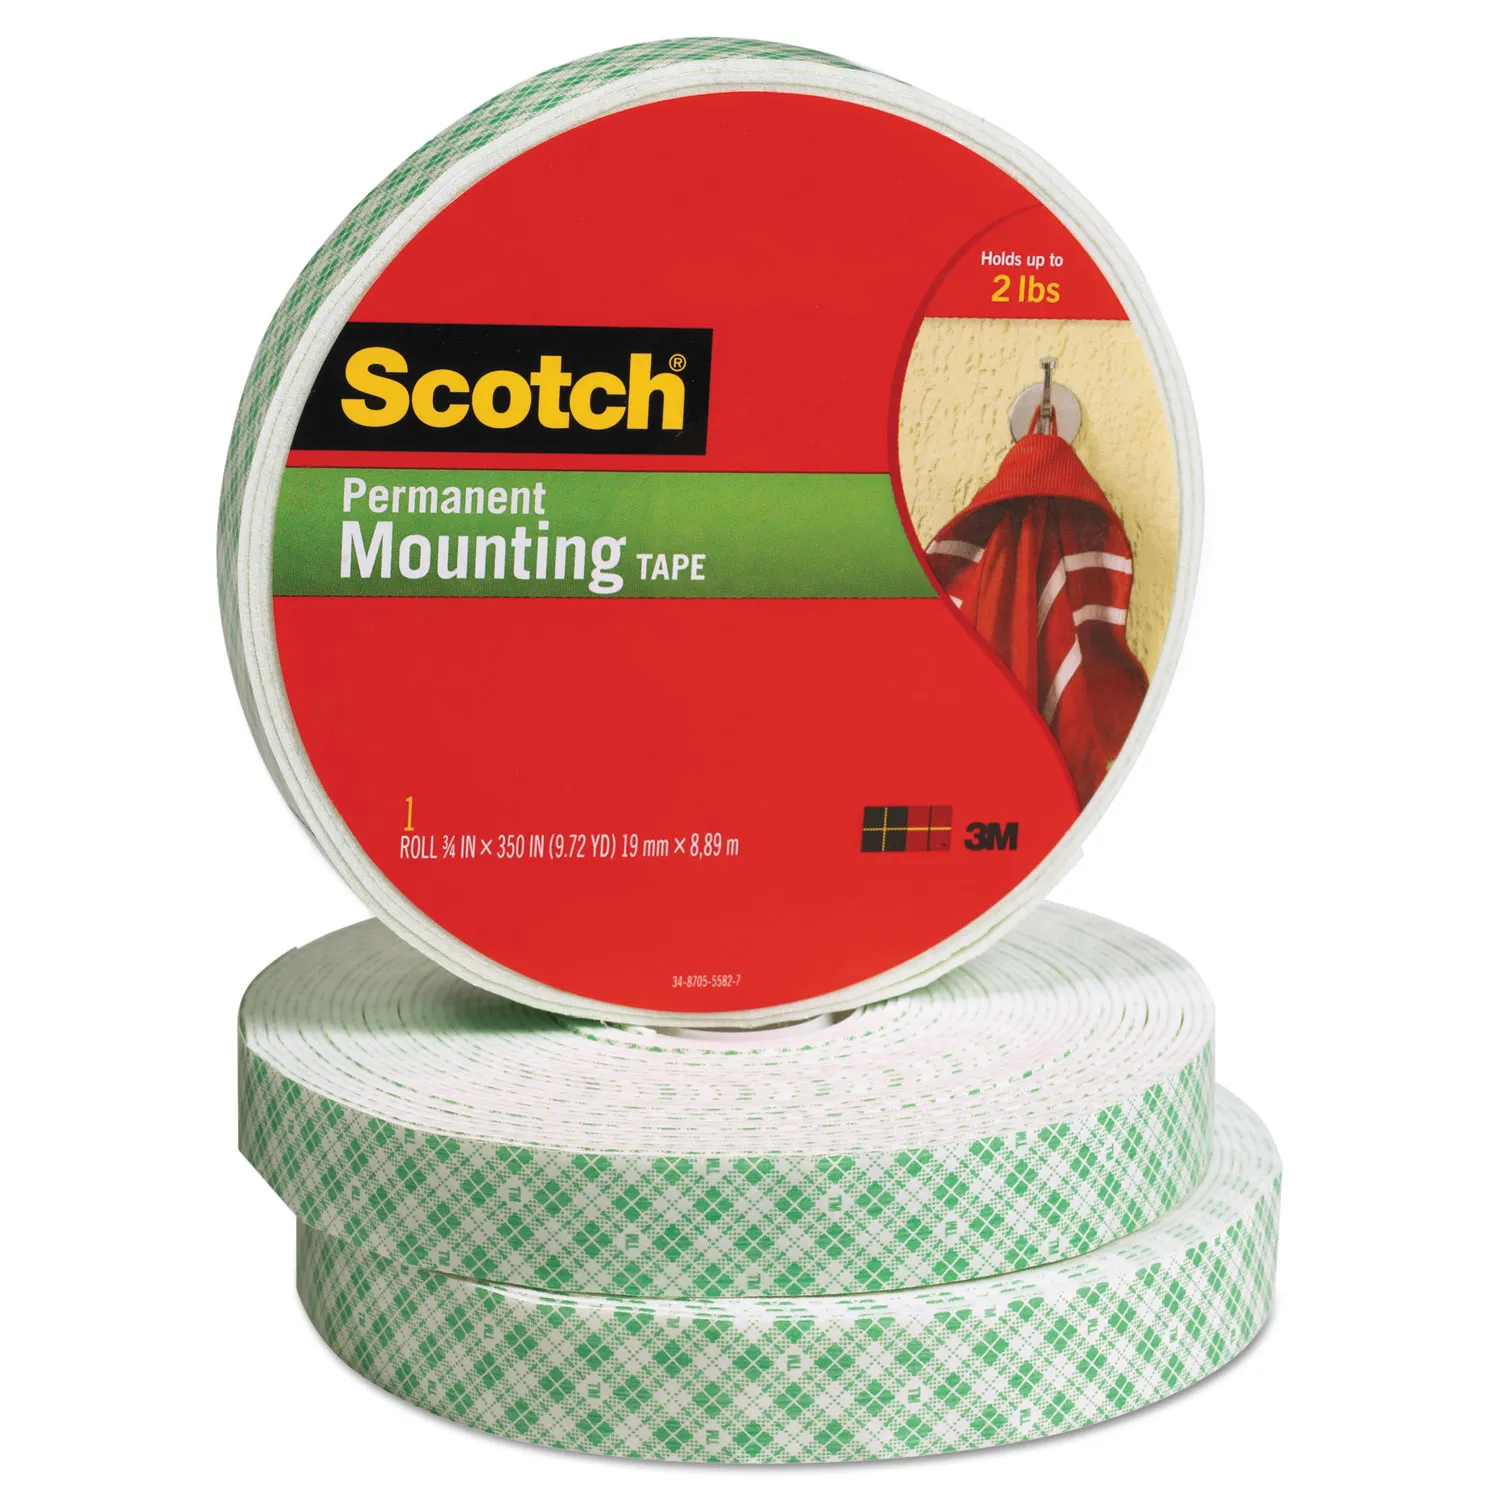 Scotch Create Double-Sided Permanent Foam Mounting Tape